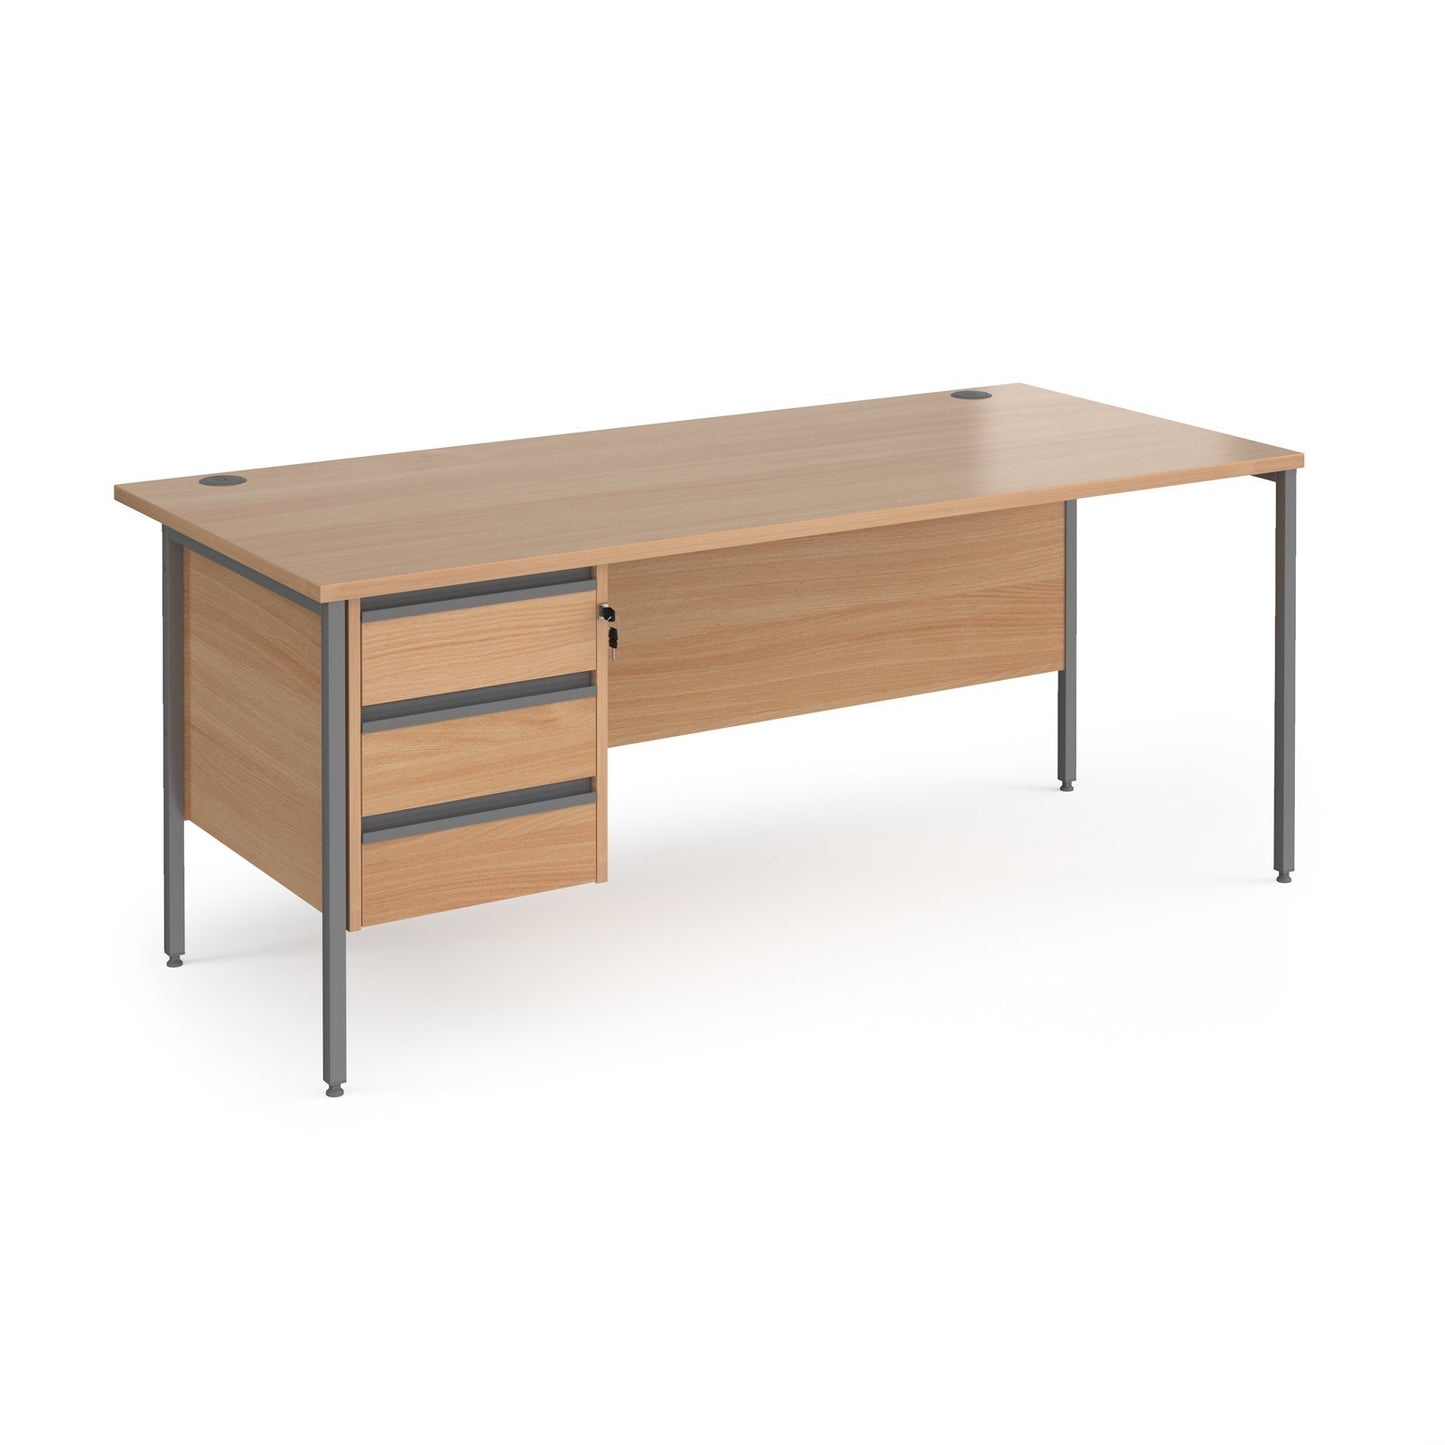 Contract 25 H-Frame straight desk with 3 drawer pedestal